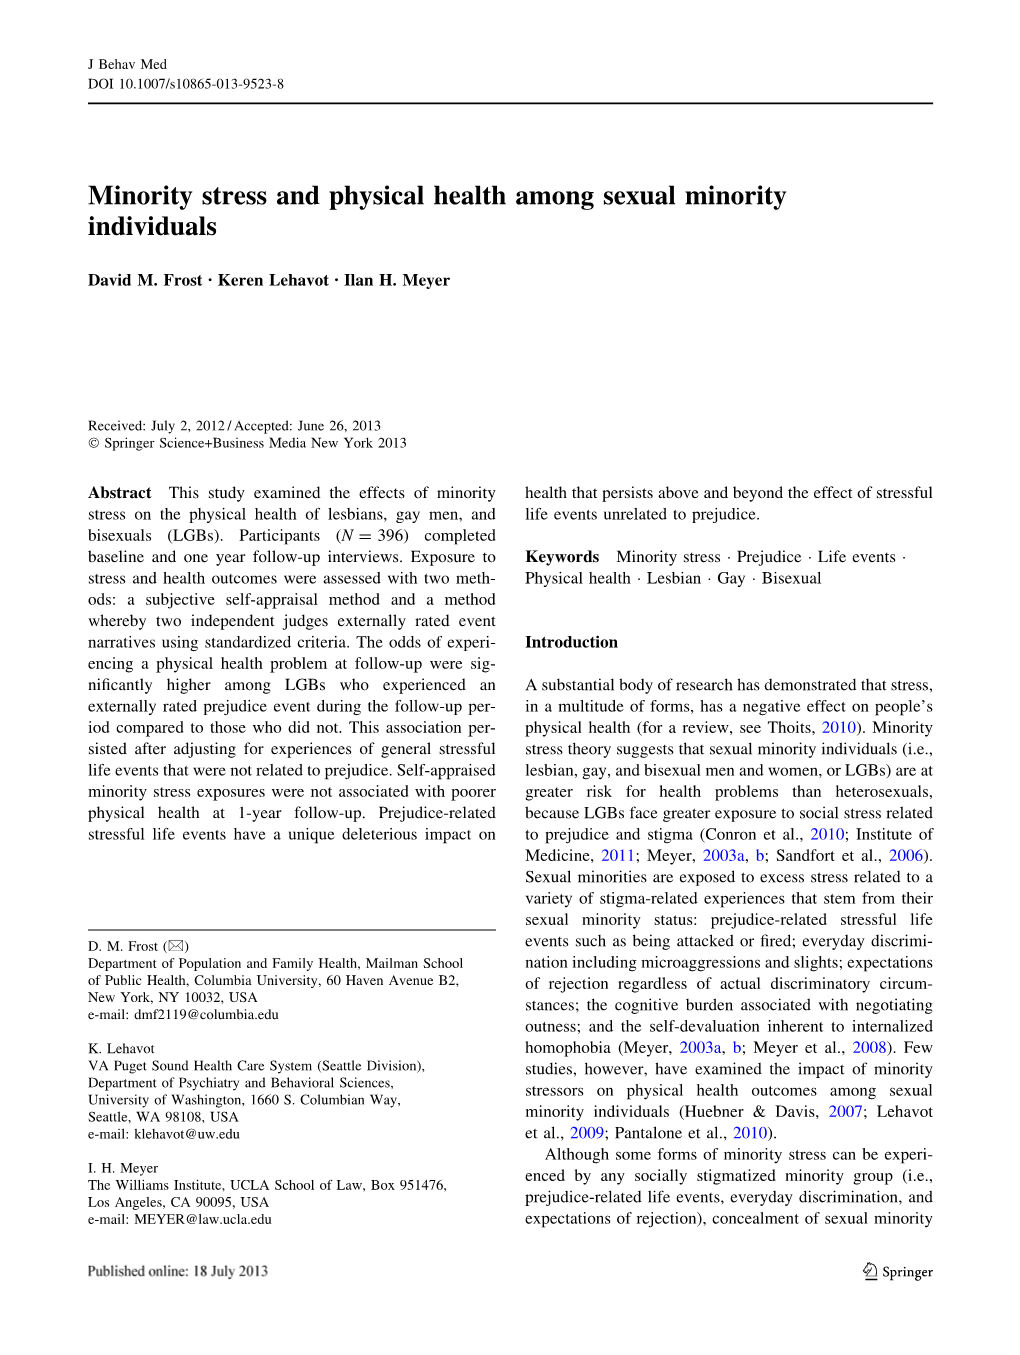 Minority Stress and Physical Health Among Sexual Minority Individuals